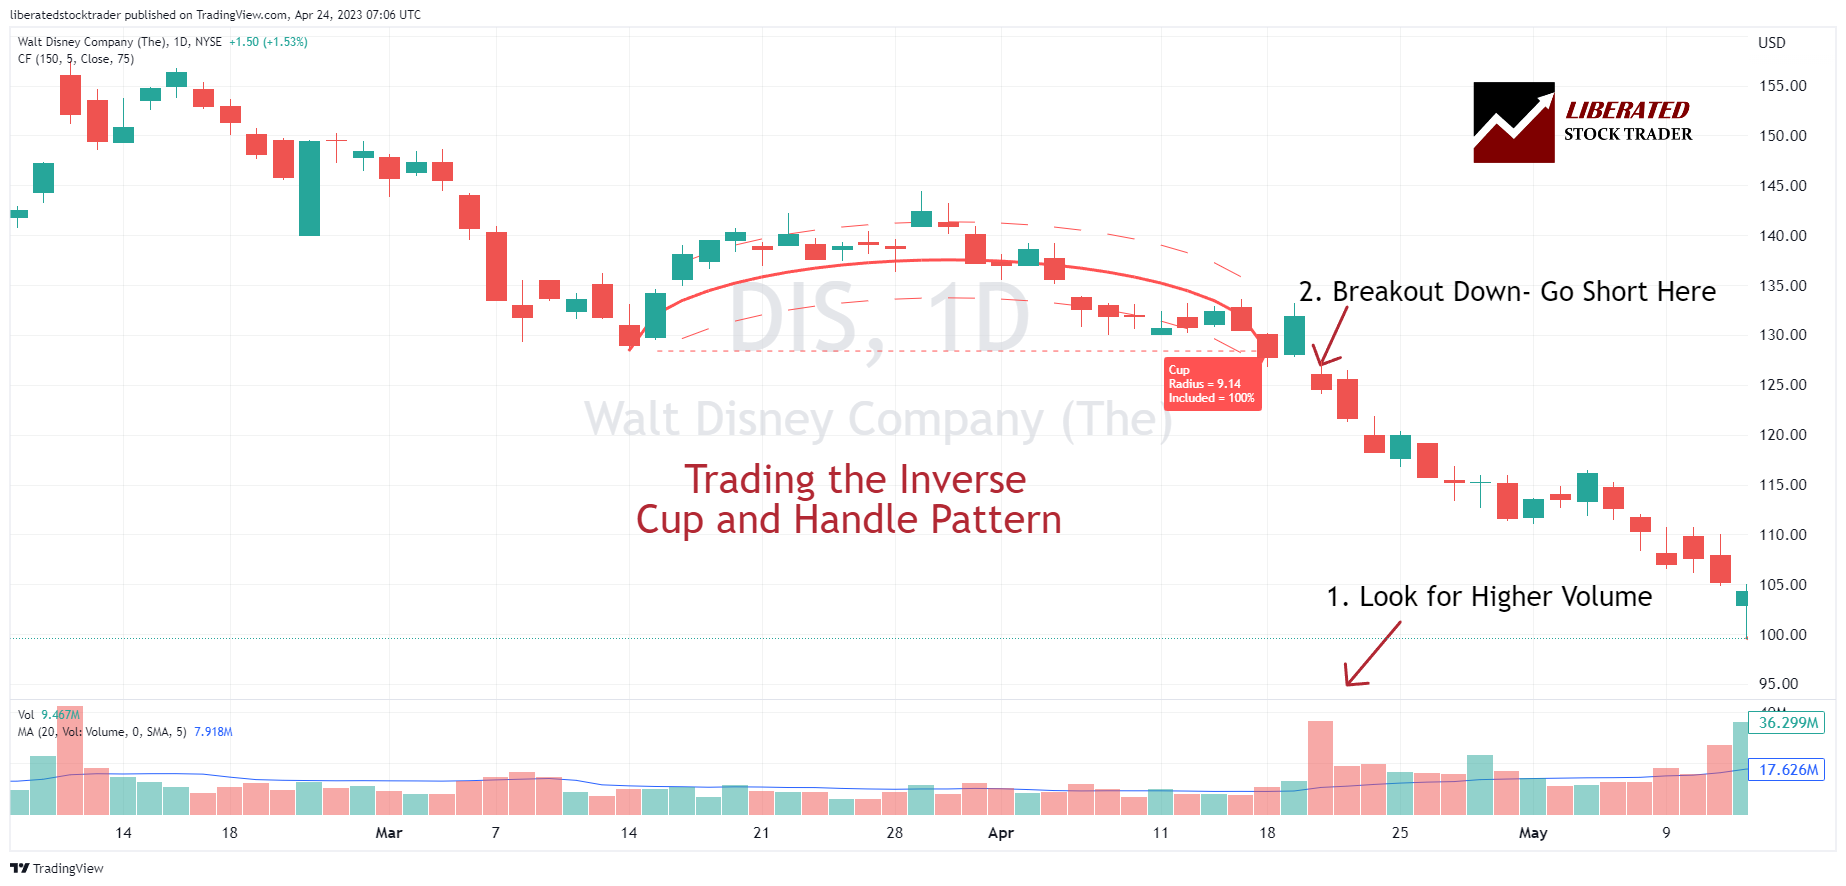 How to Trade the Inverse Cup and Handle Pattern